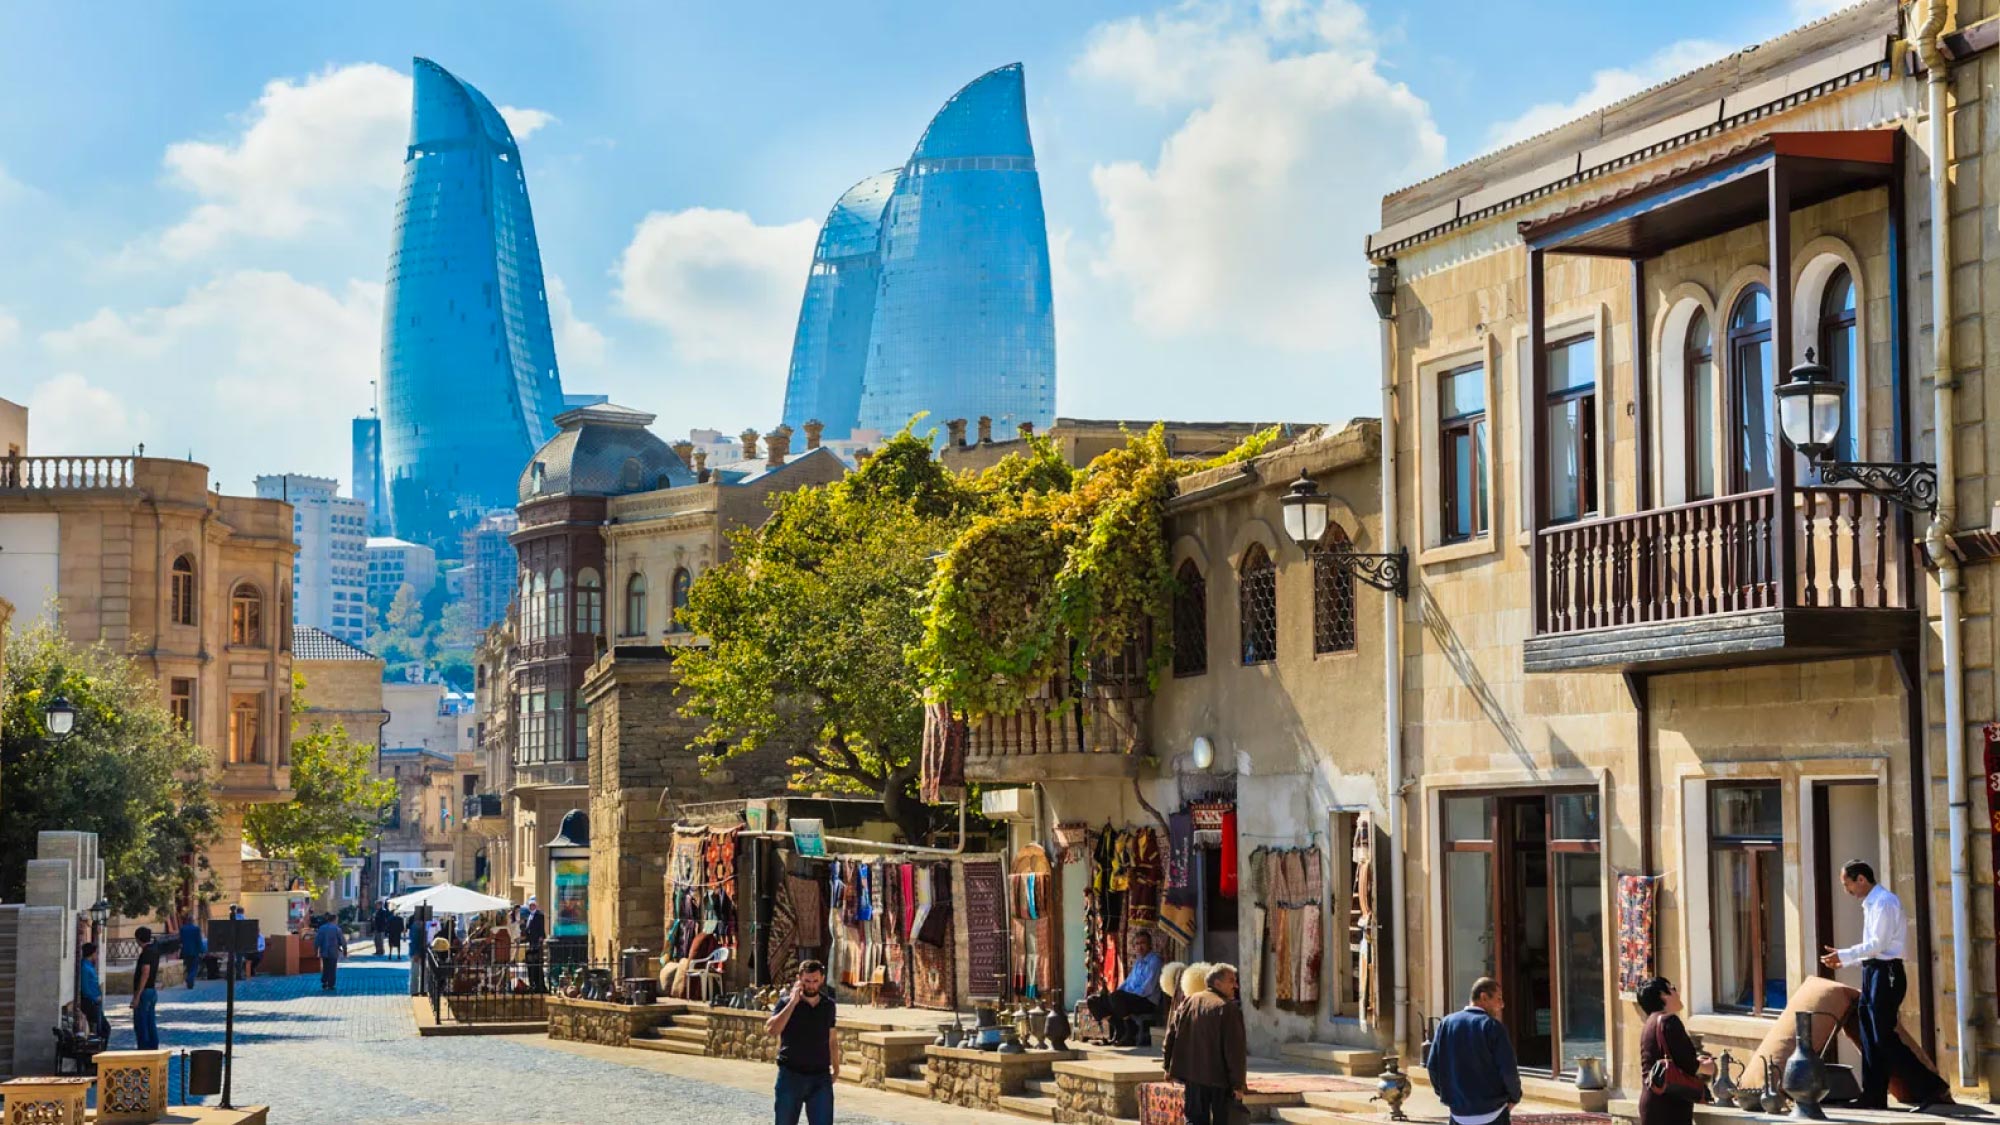 A picturesque view of the cityscape of Baku, Azerbaijan, featuring modern skyscrapers juxtaposed against historic buildings and the Caspian Sea. Baku is a highlight of a journey to Australia, visiting 21 countries, ideal for travelers who fly and own their own airplanes.